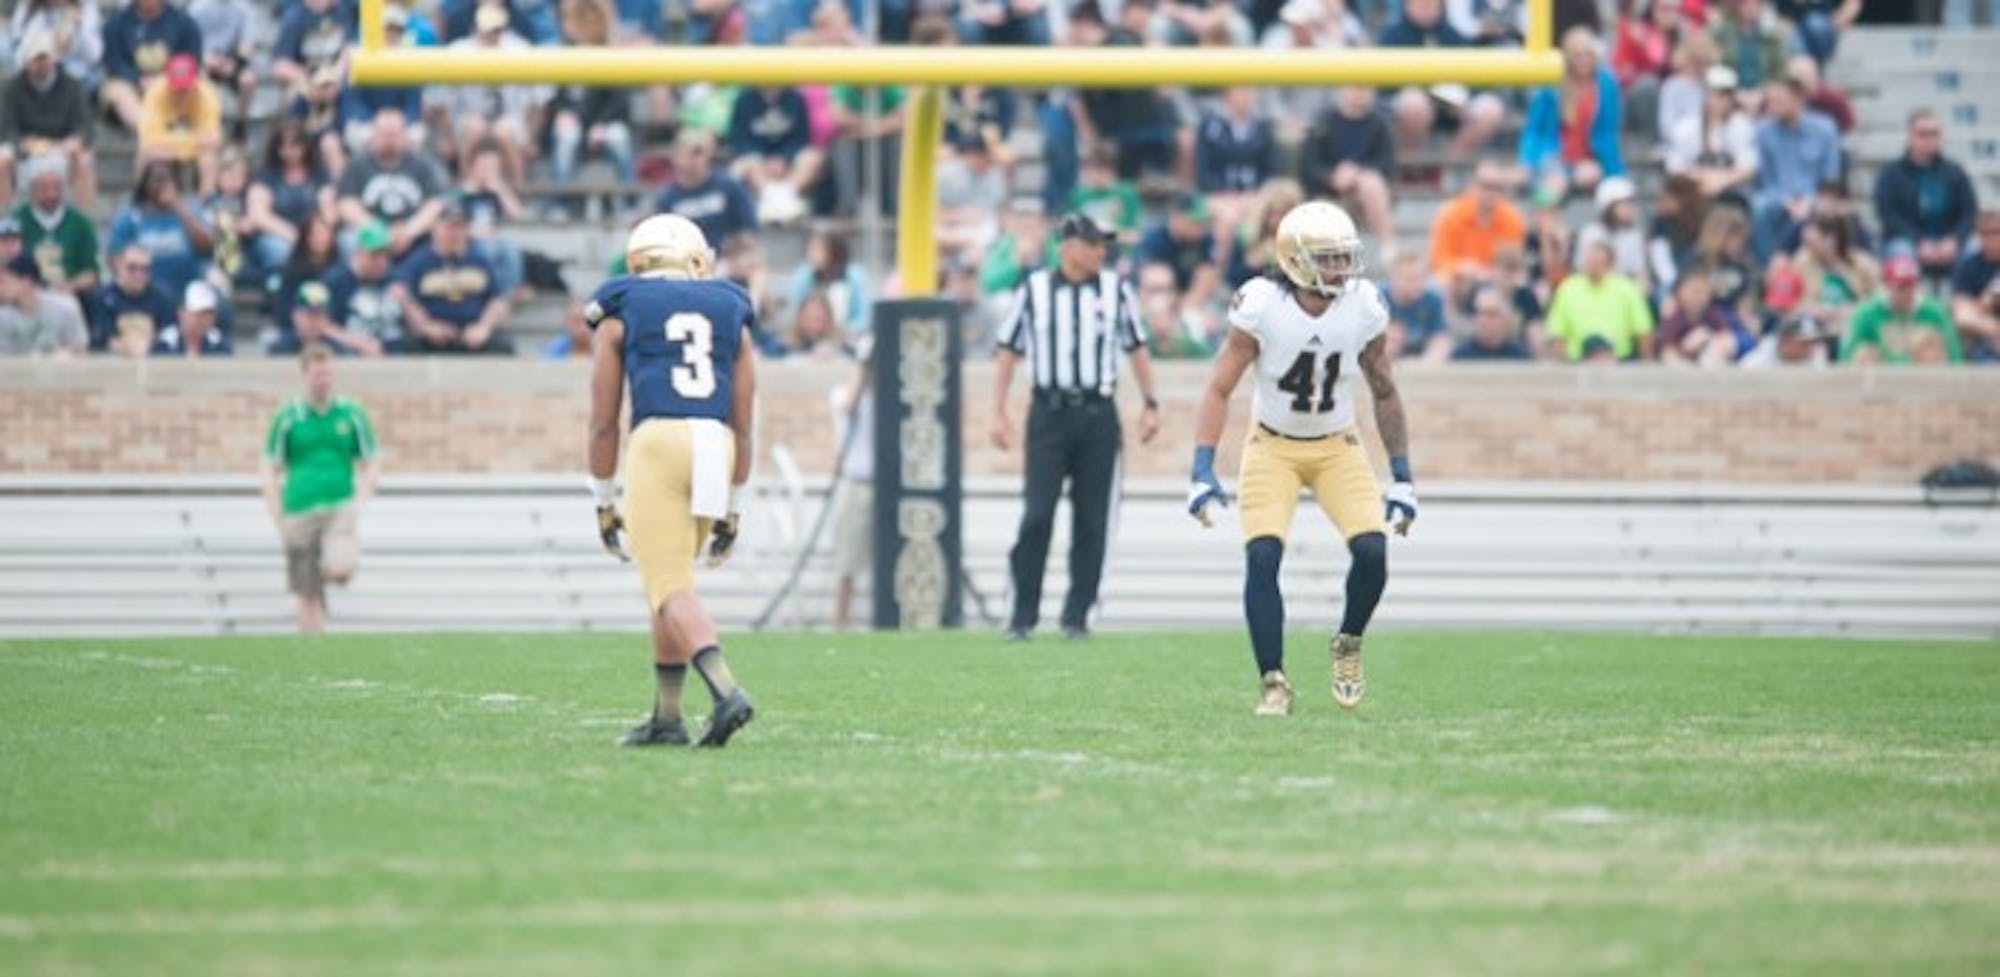 Senior receiver Amir Carlisle, left, lines up against senior cornerback Matthias Farley during the Blue-Gold Game on Saturday. With the announcement that a synthetic playing surface will be installed before the 2014 season, the spring game was the last time the Irish will play on a natural grass field at Notre Dame Stadium.